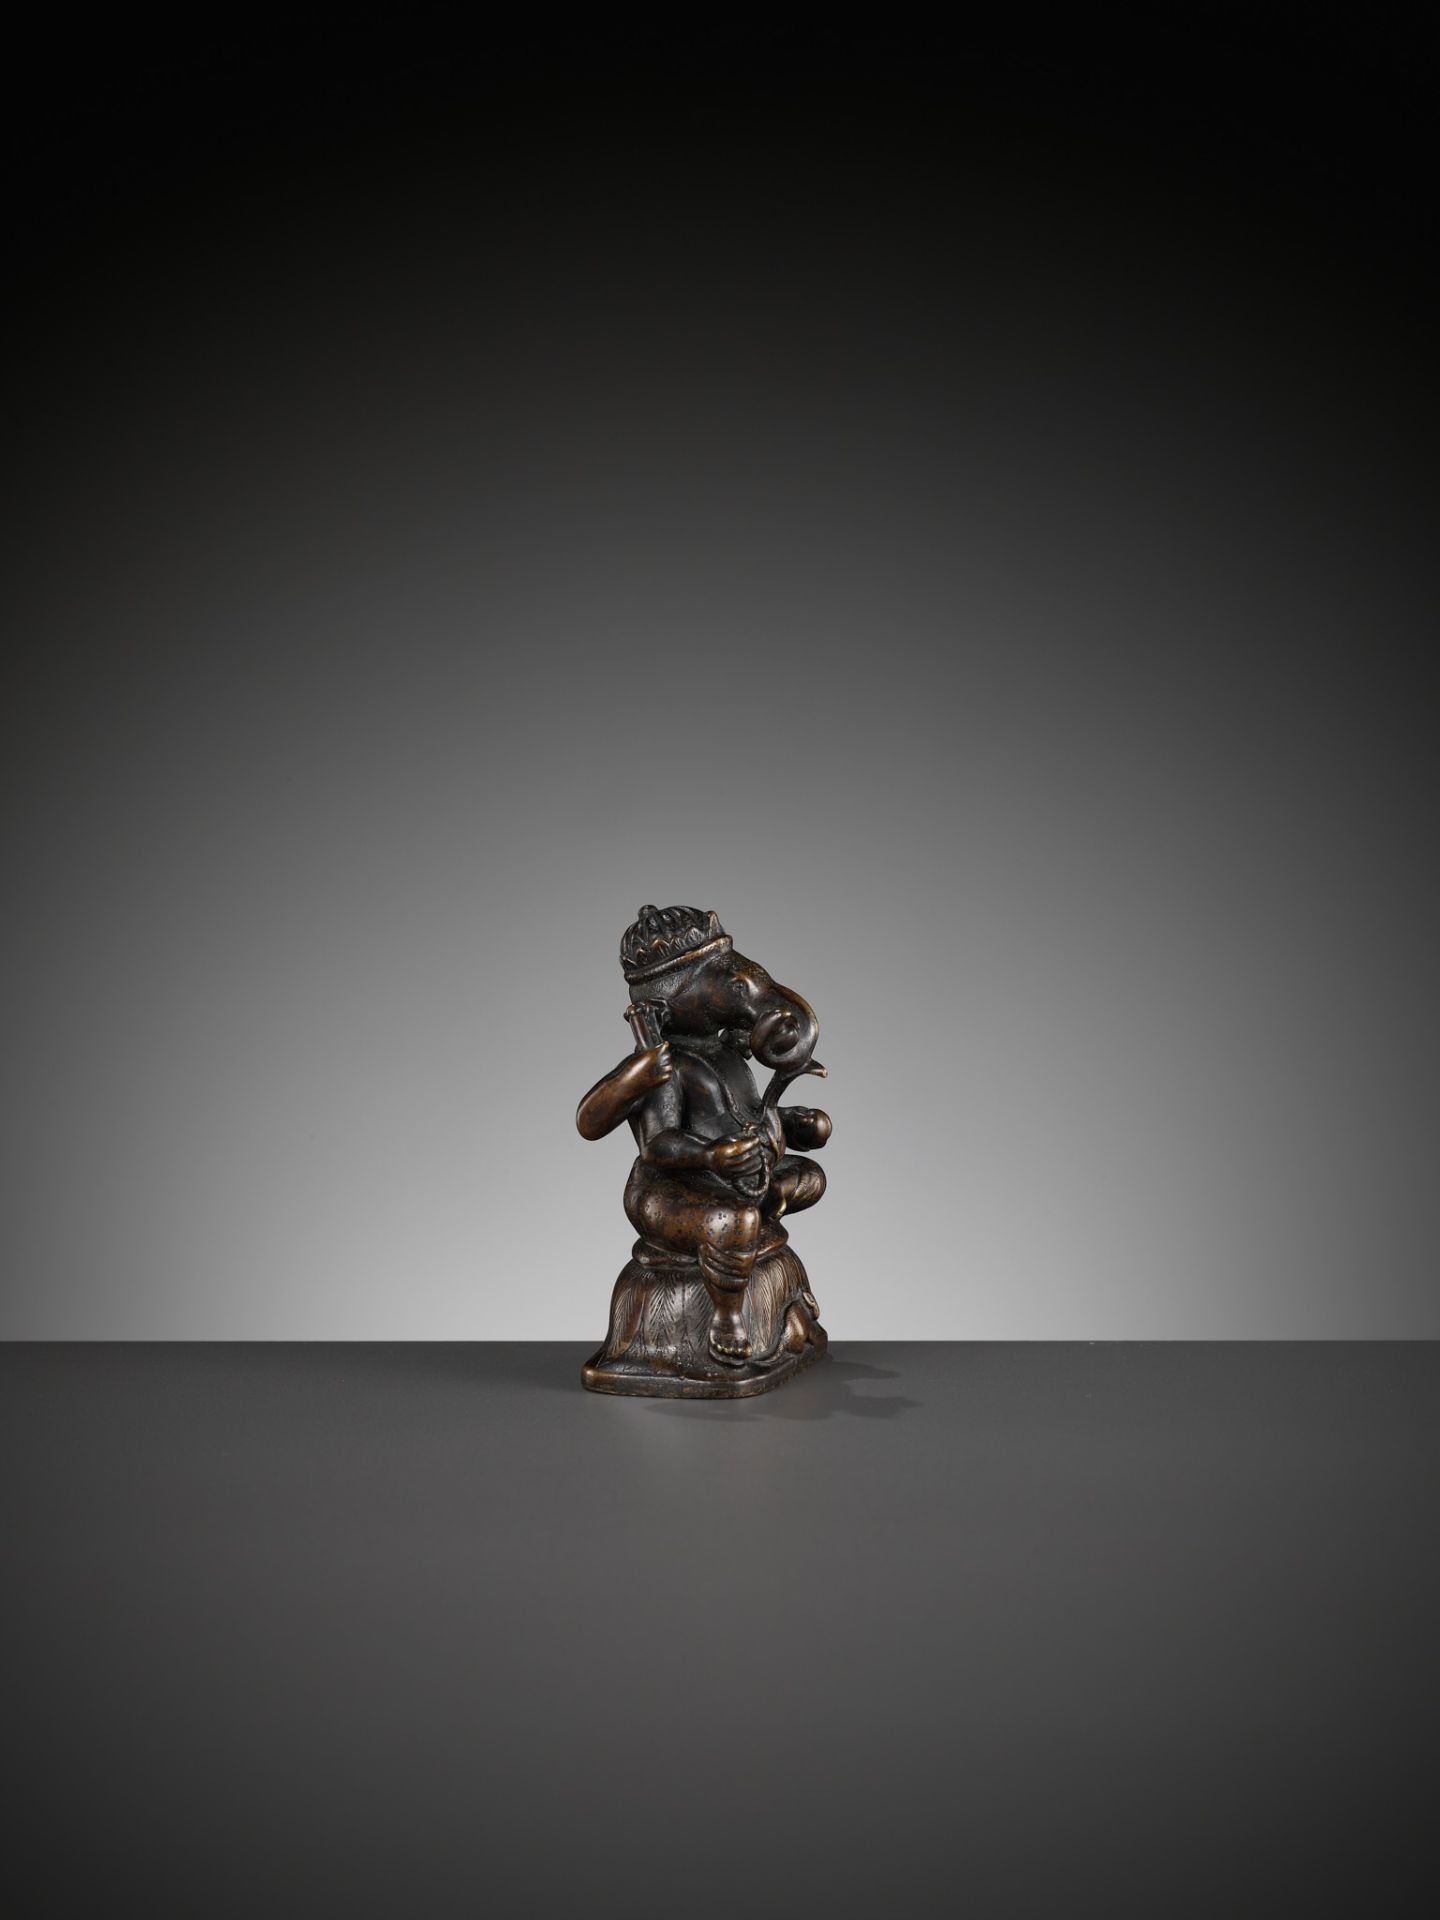 A SMALL BRONZE FIGURE OF GANESHA, SOUTH INDIA, 17TH - 18TH CENTURY - Image 11 of 14